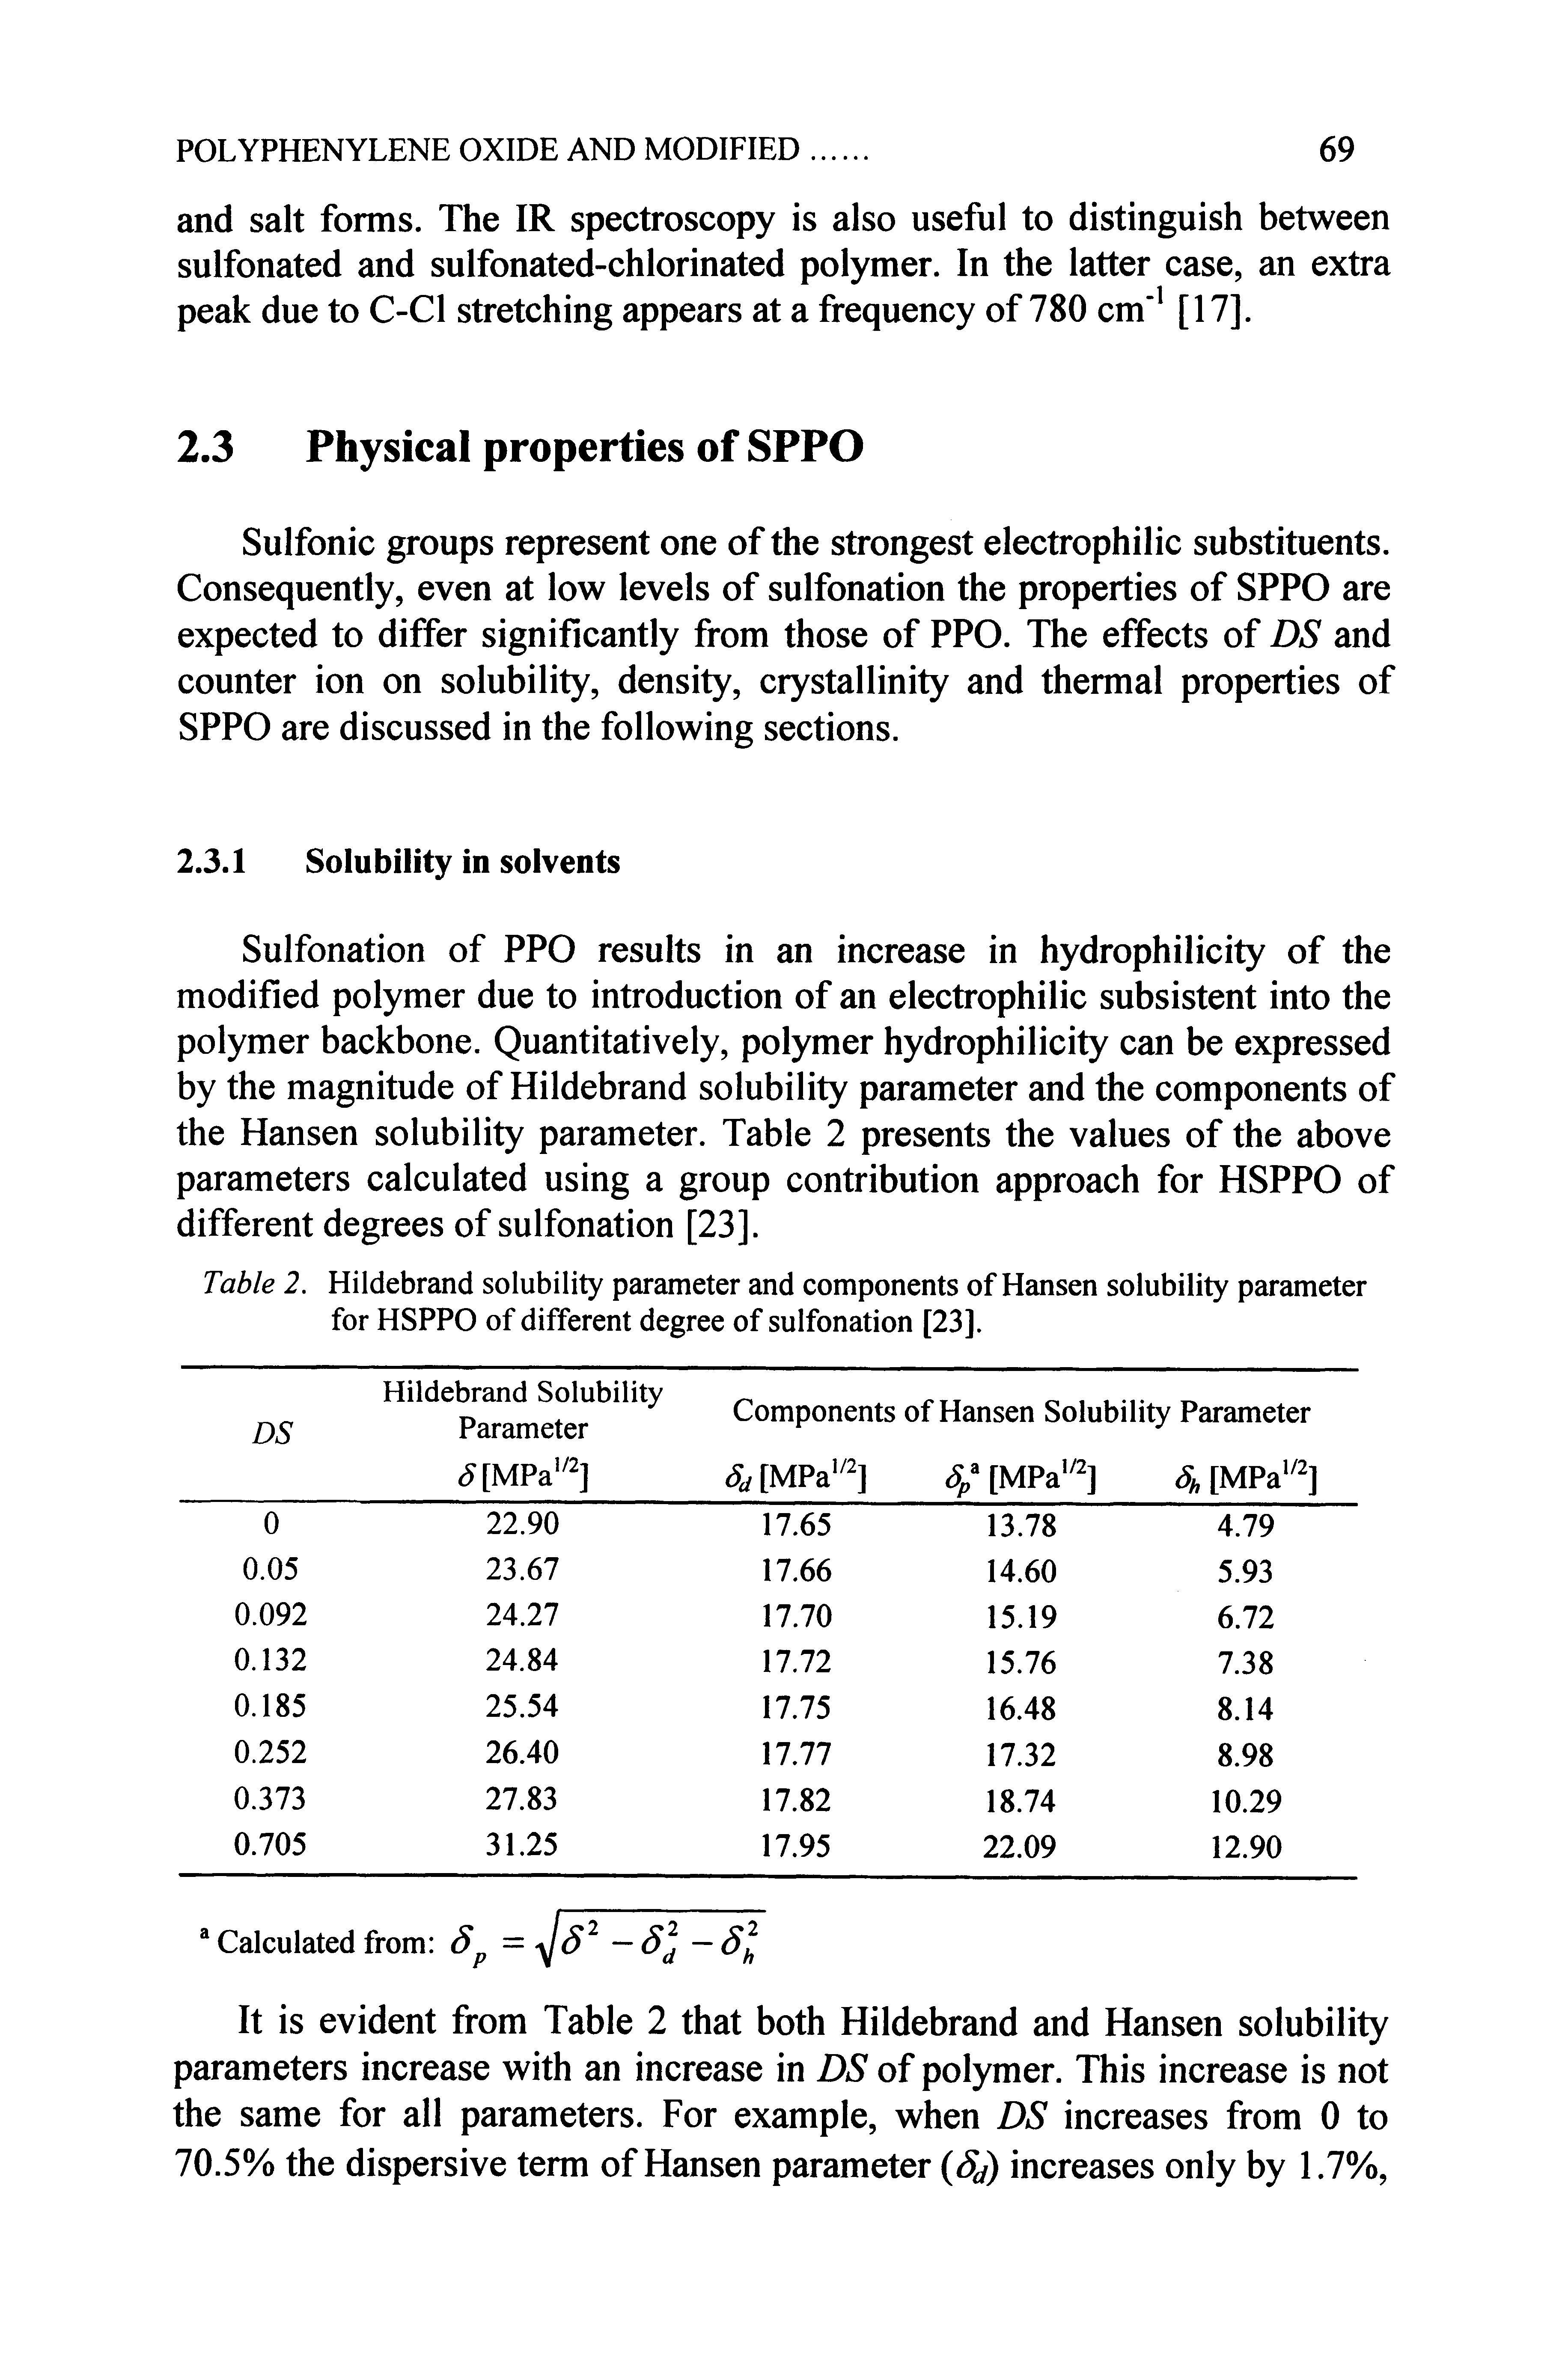 Table 2. Hildebrand solubility parameter and components of Hansen solubility parameter for HSPPO of different degree of sulfonation [23],...